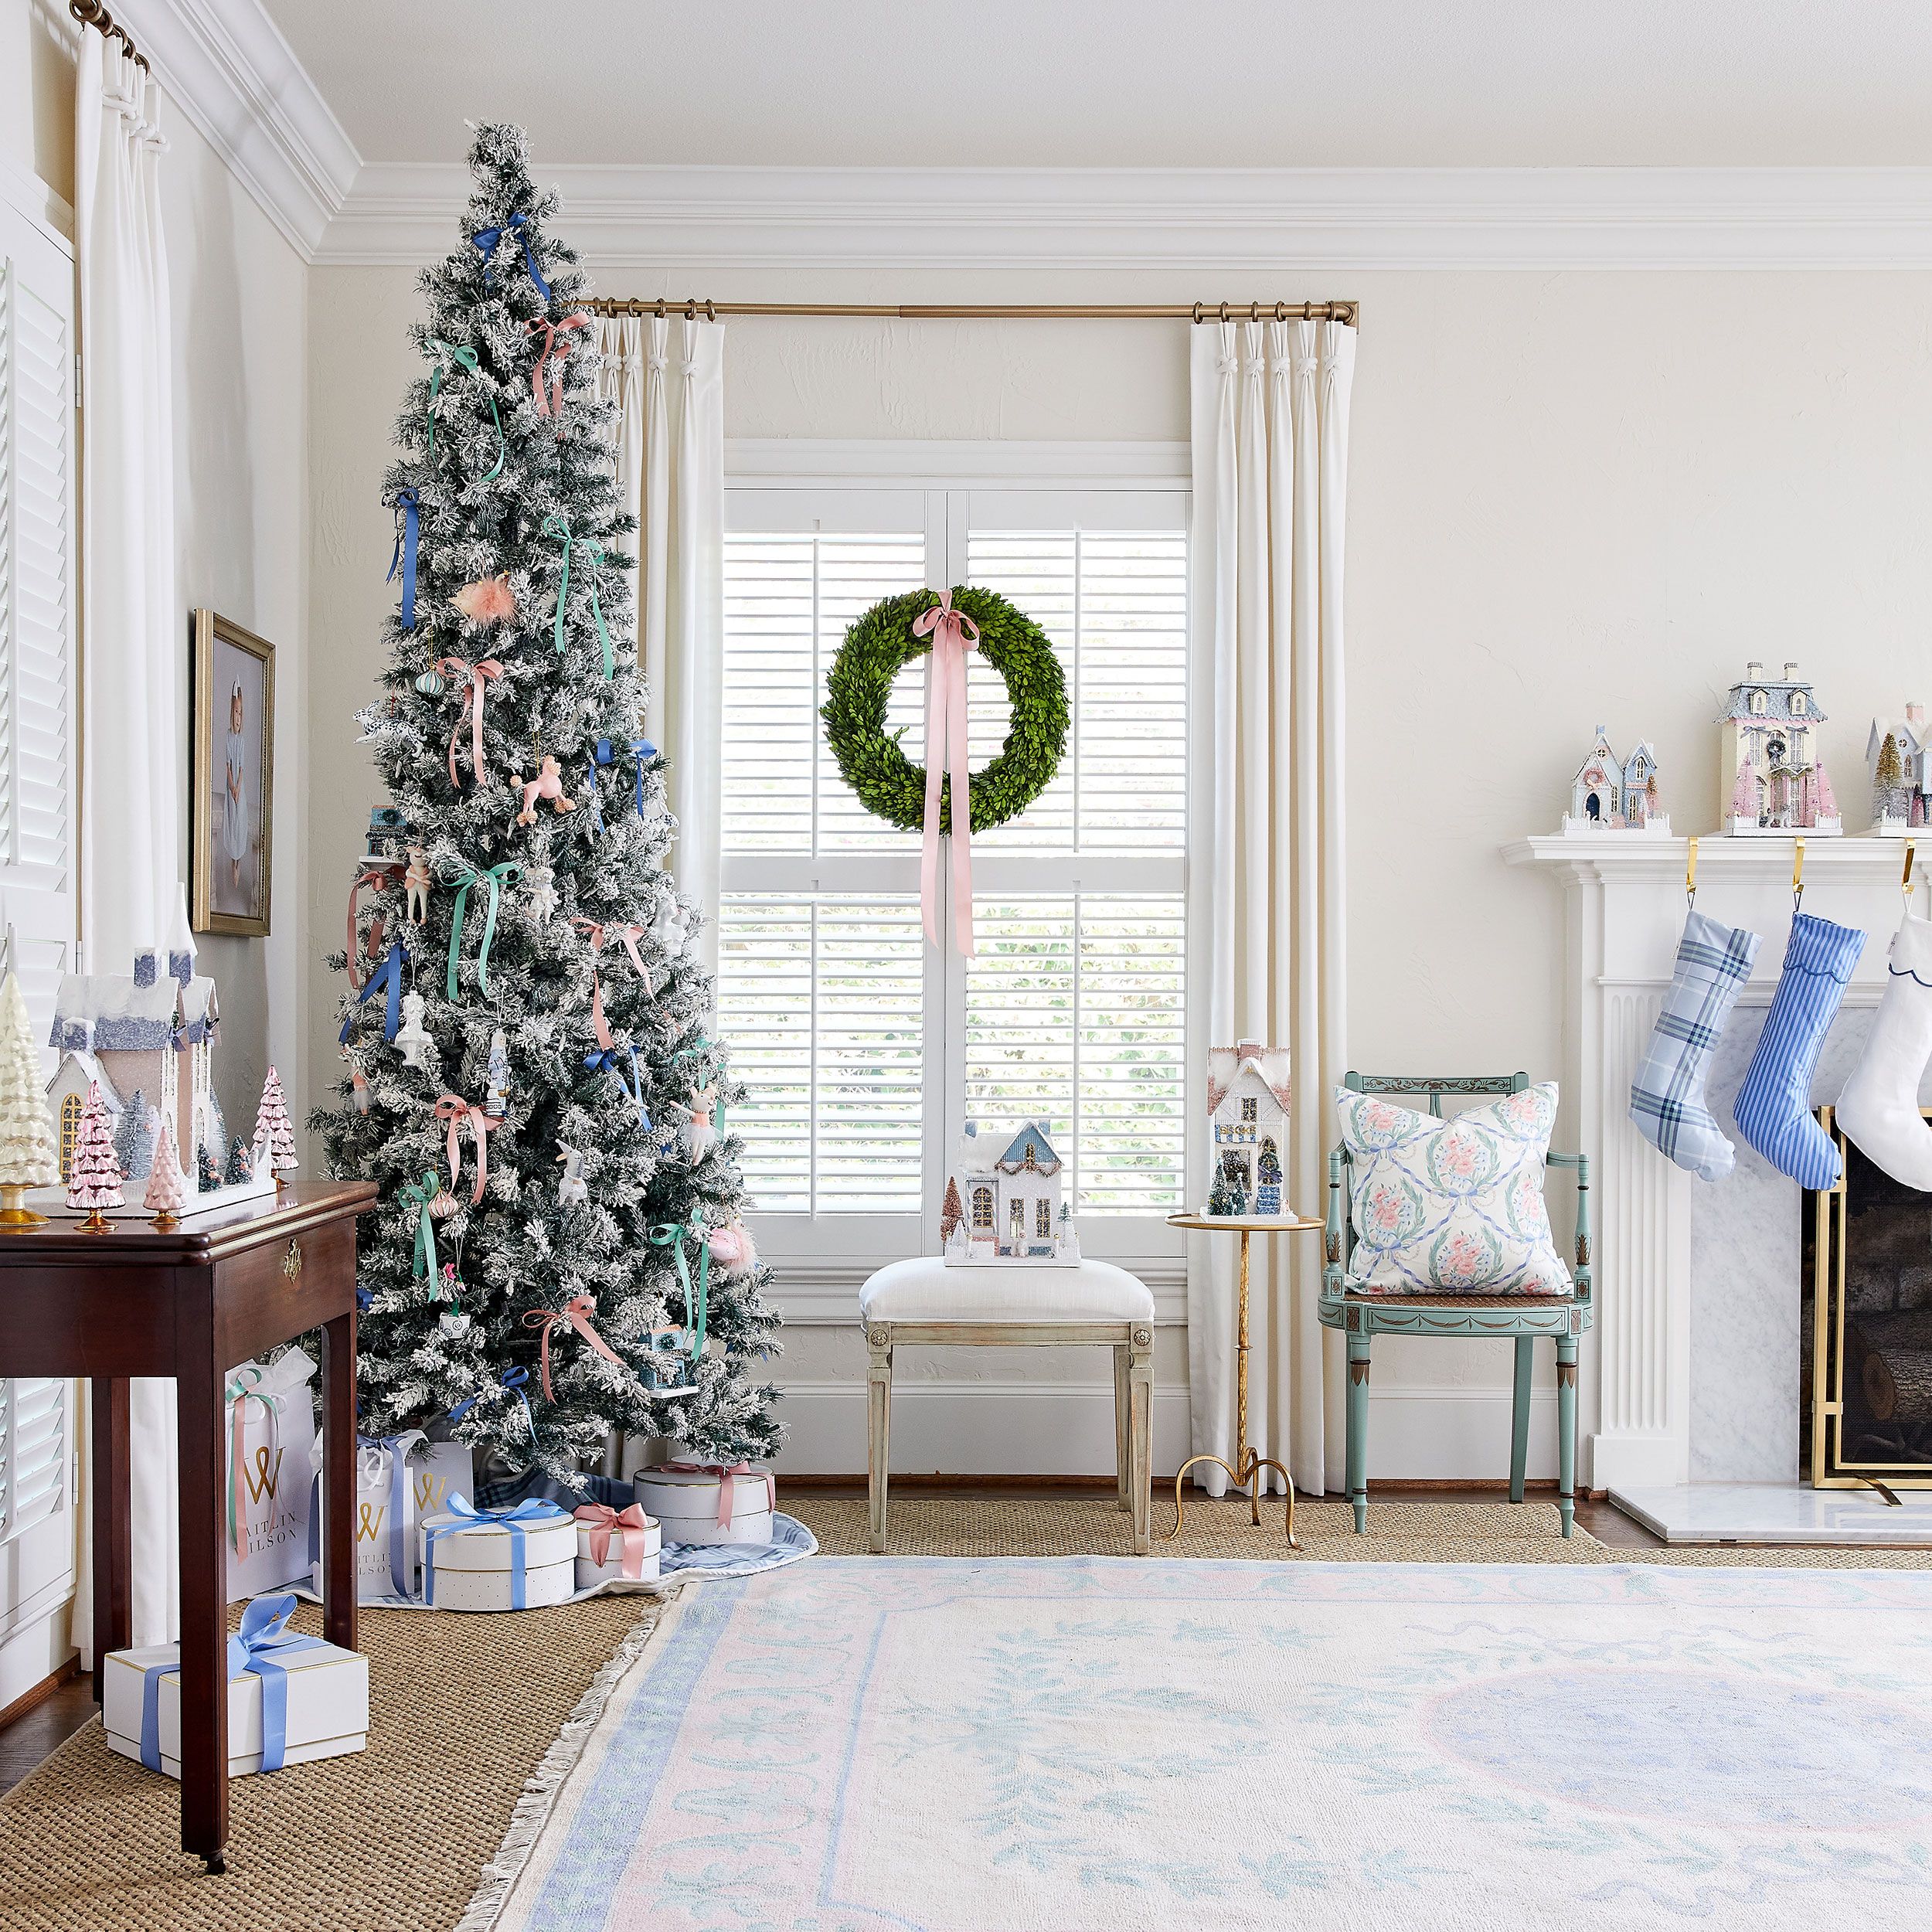 Tips For Decorating A Small Space For Christmas - StoneGable